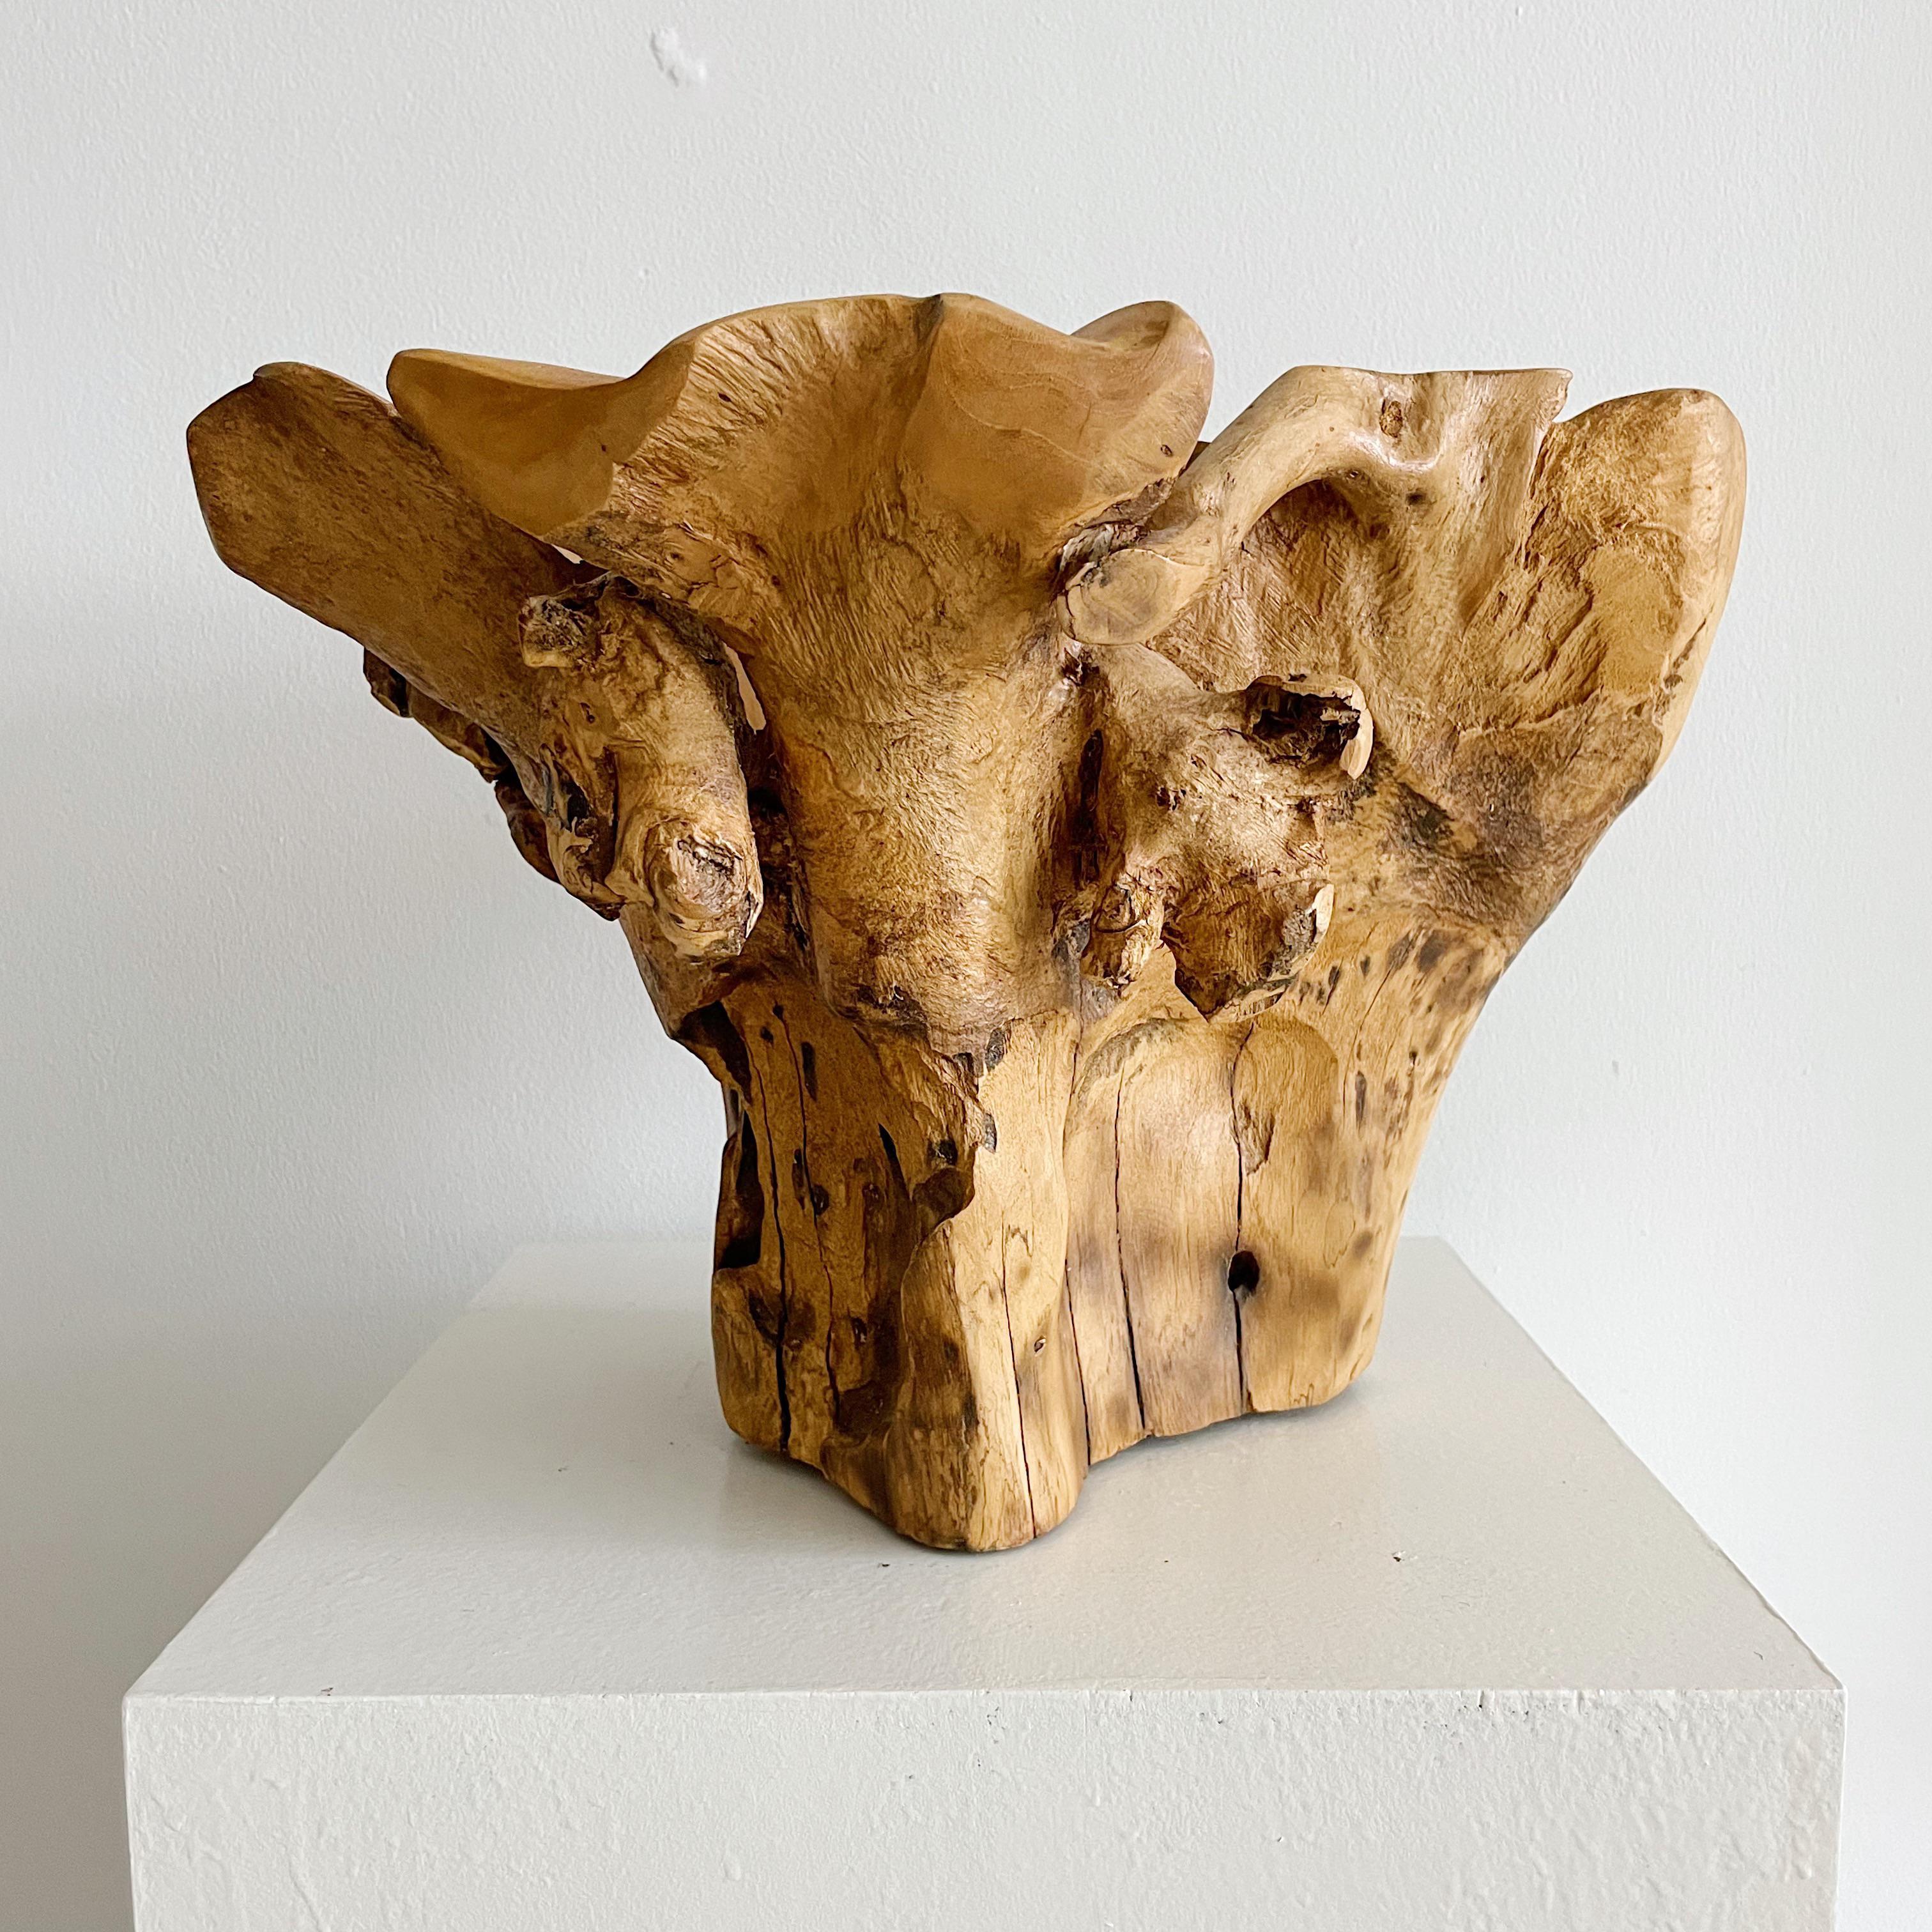 For sale is a large, freeform organic wood bowl. This unique piece features a one-of-a-kind design and is perfect for use as a centerpiece in any room. Though unsigned, the beauty and craftsmanship of this bowl speak for themselves.